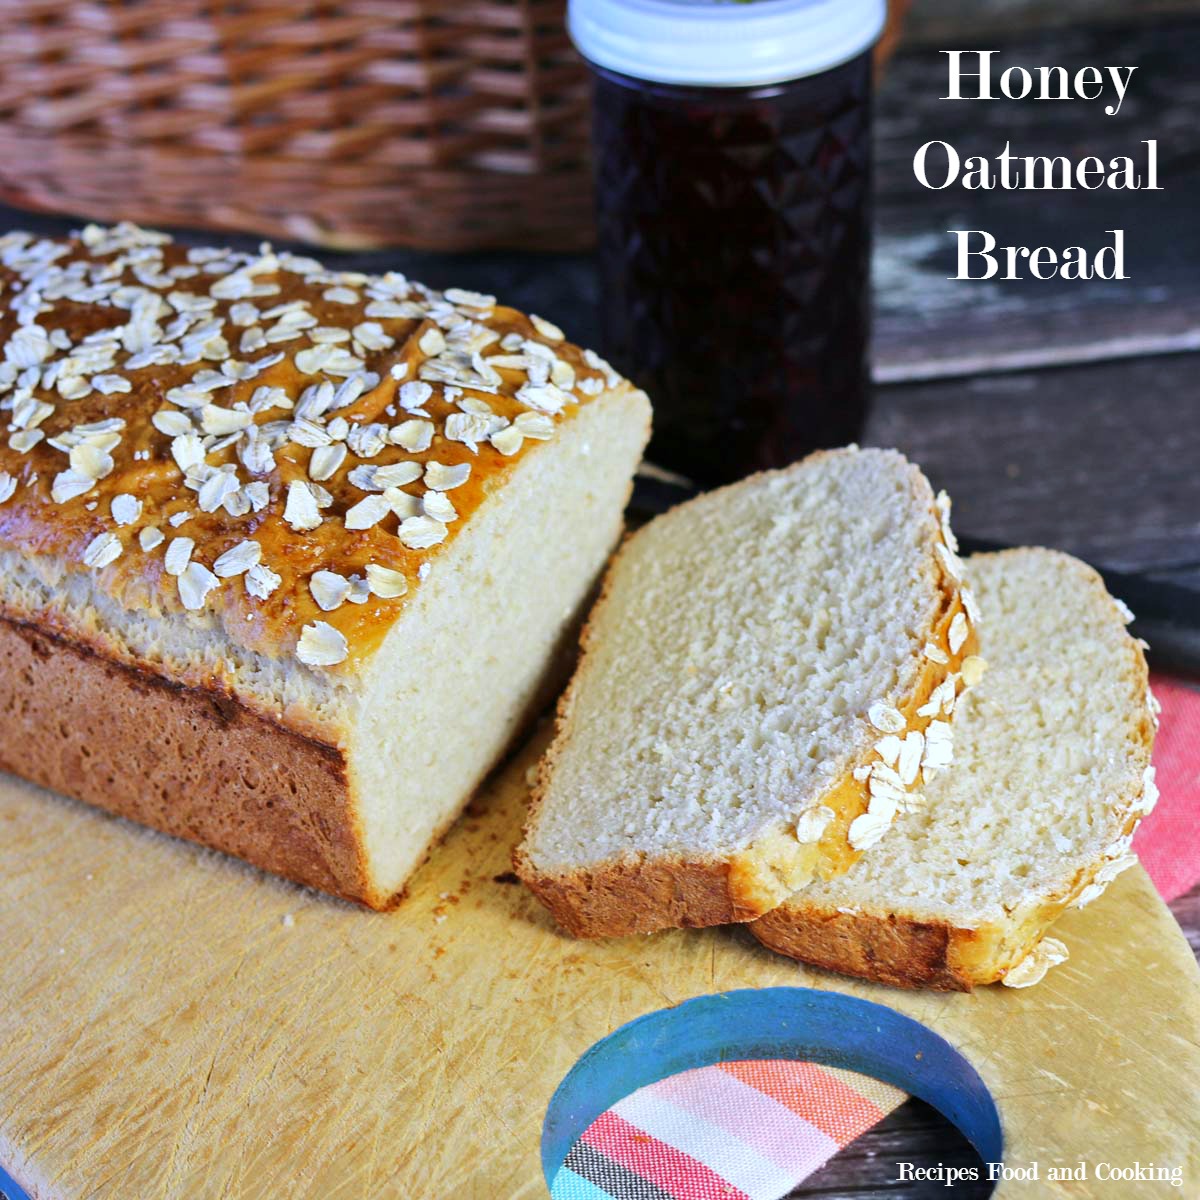 Honey Oatmeal Bread BreadBakers Recipes Food and Cooking